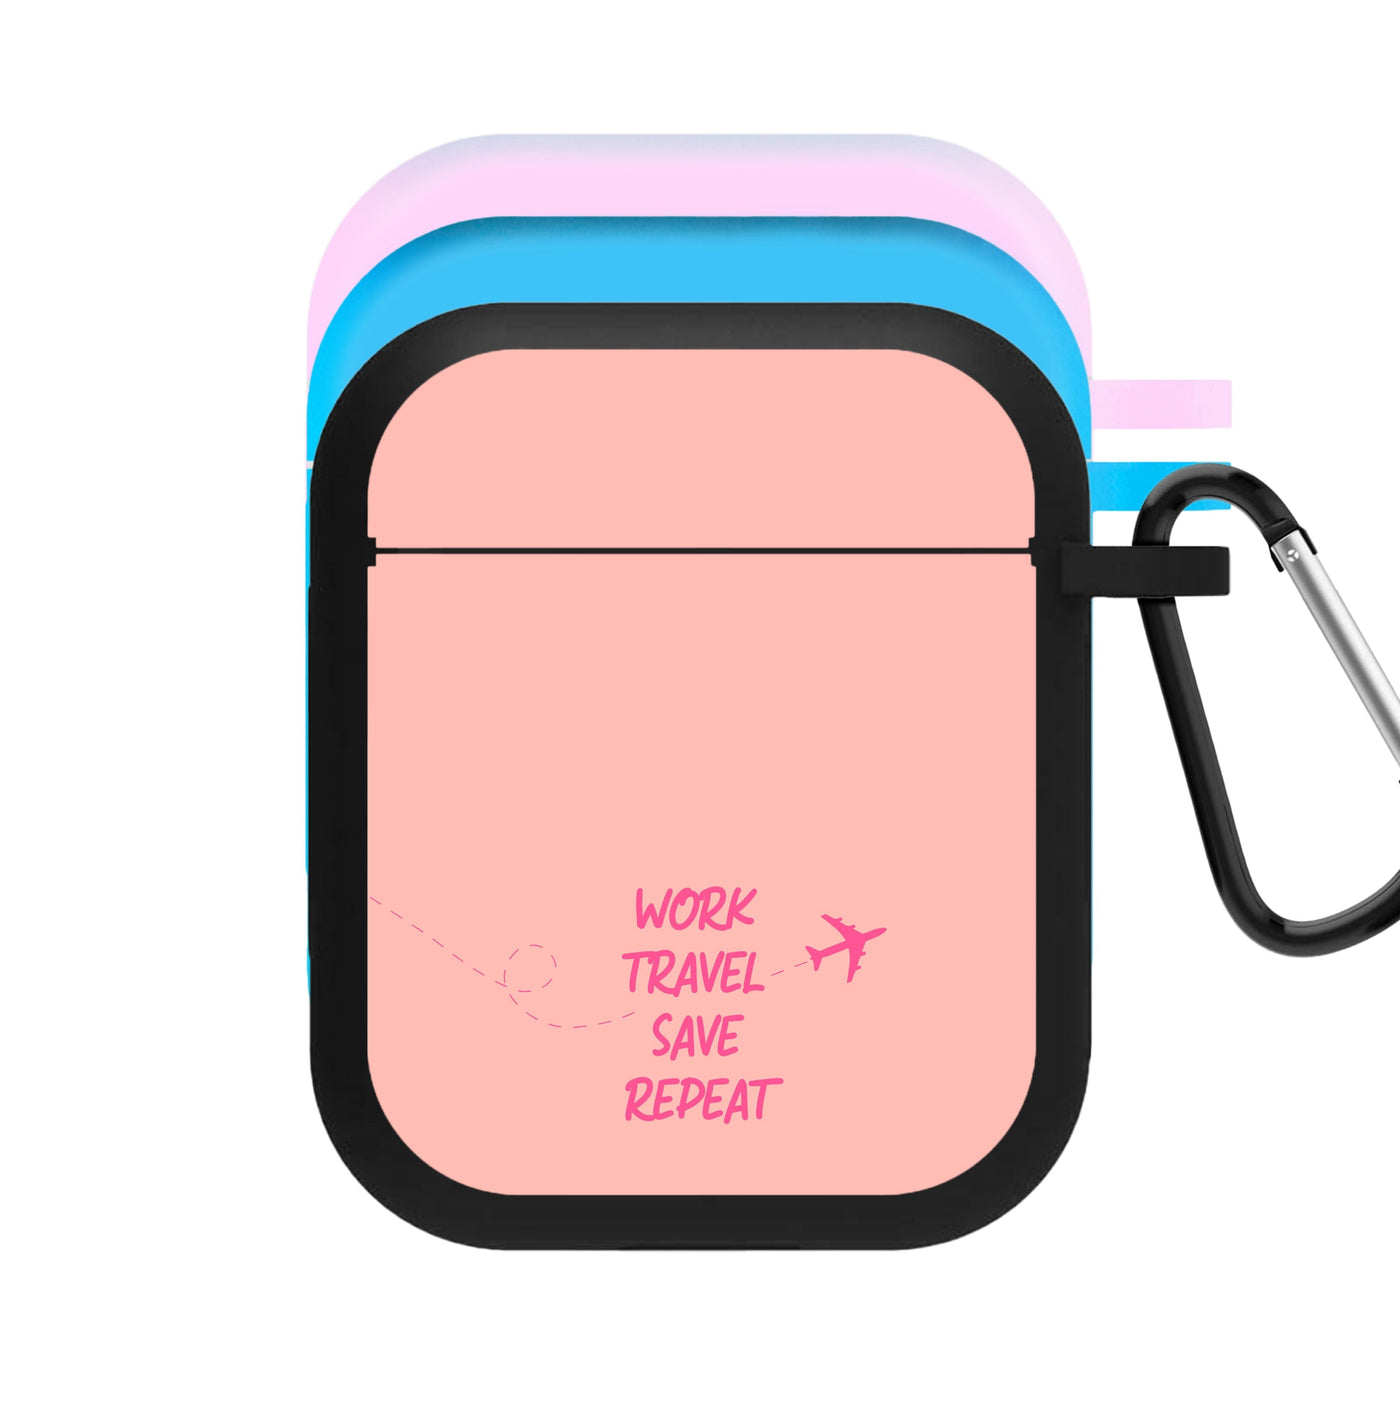 Work Travel Save Repeat - Travel AirPods Case